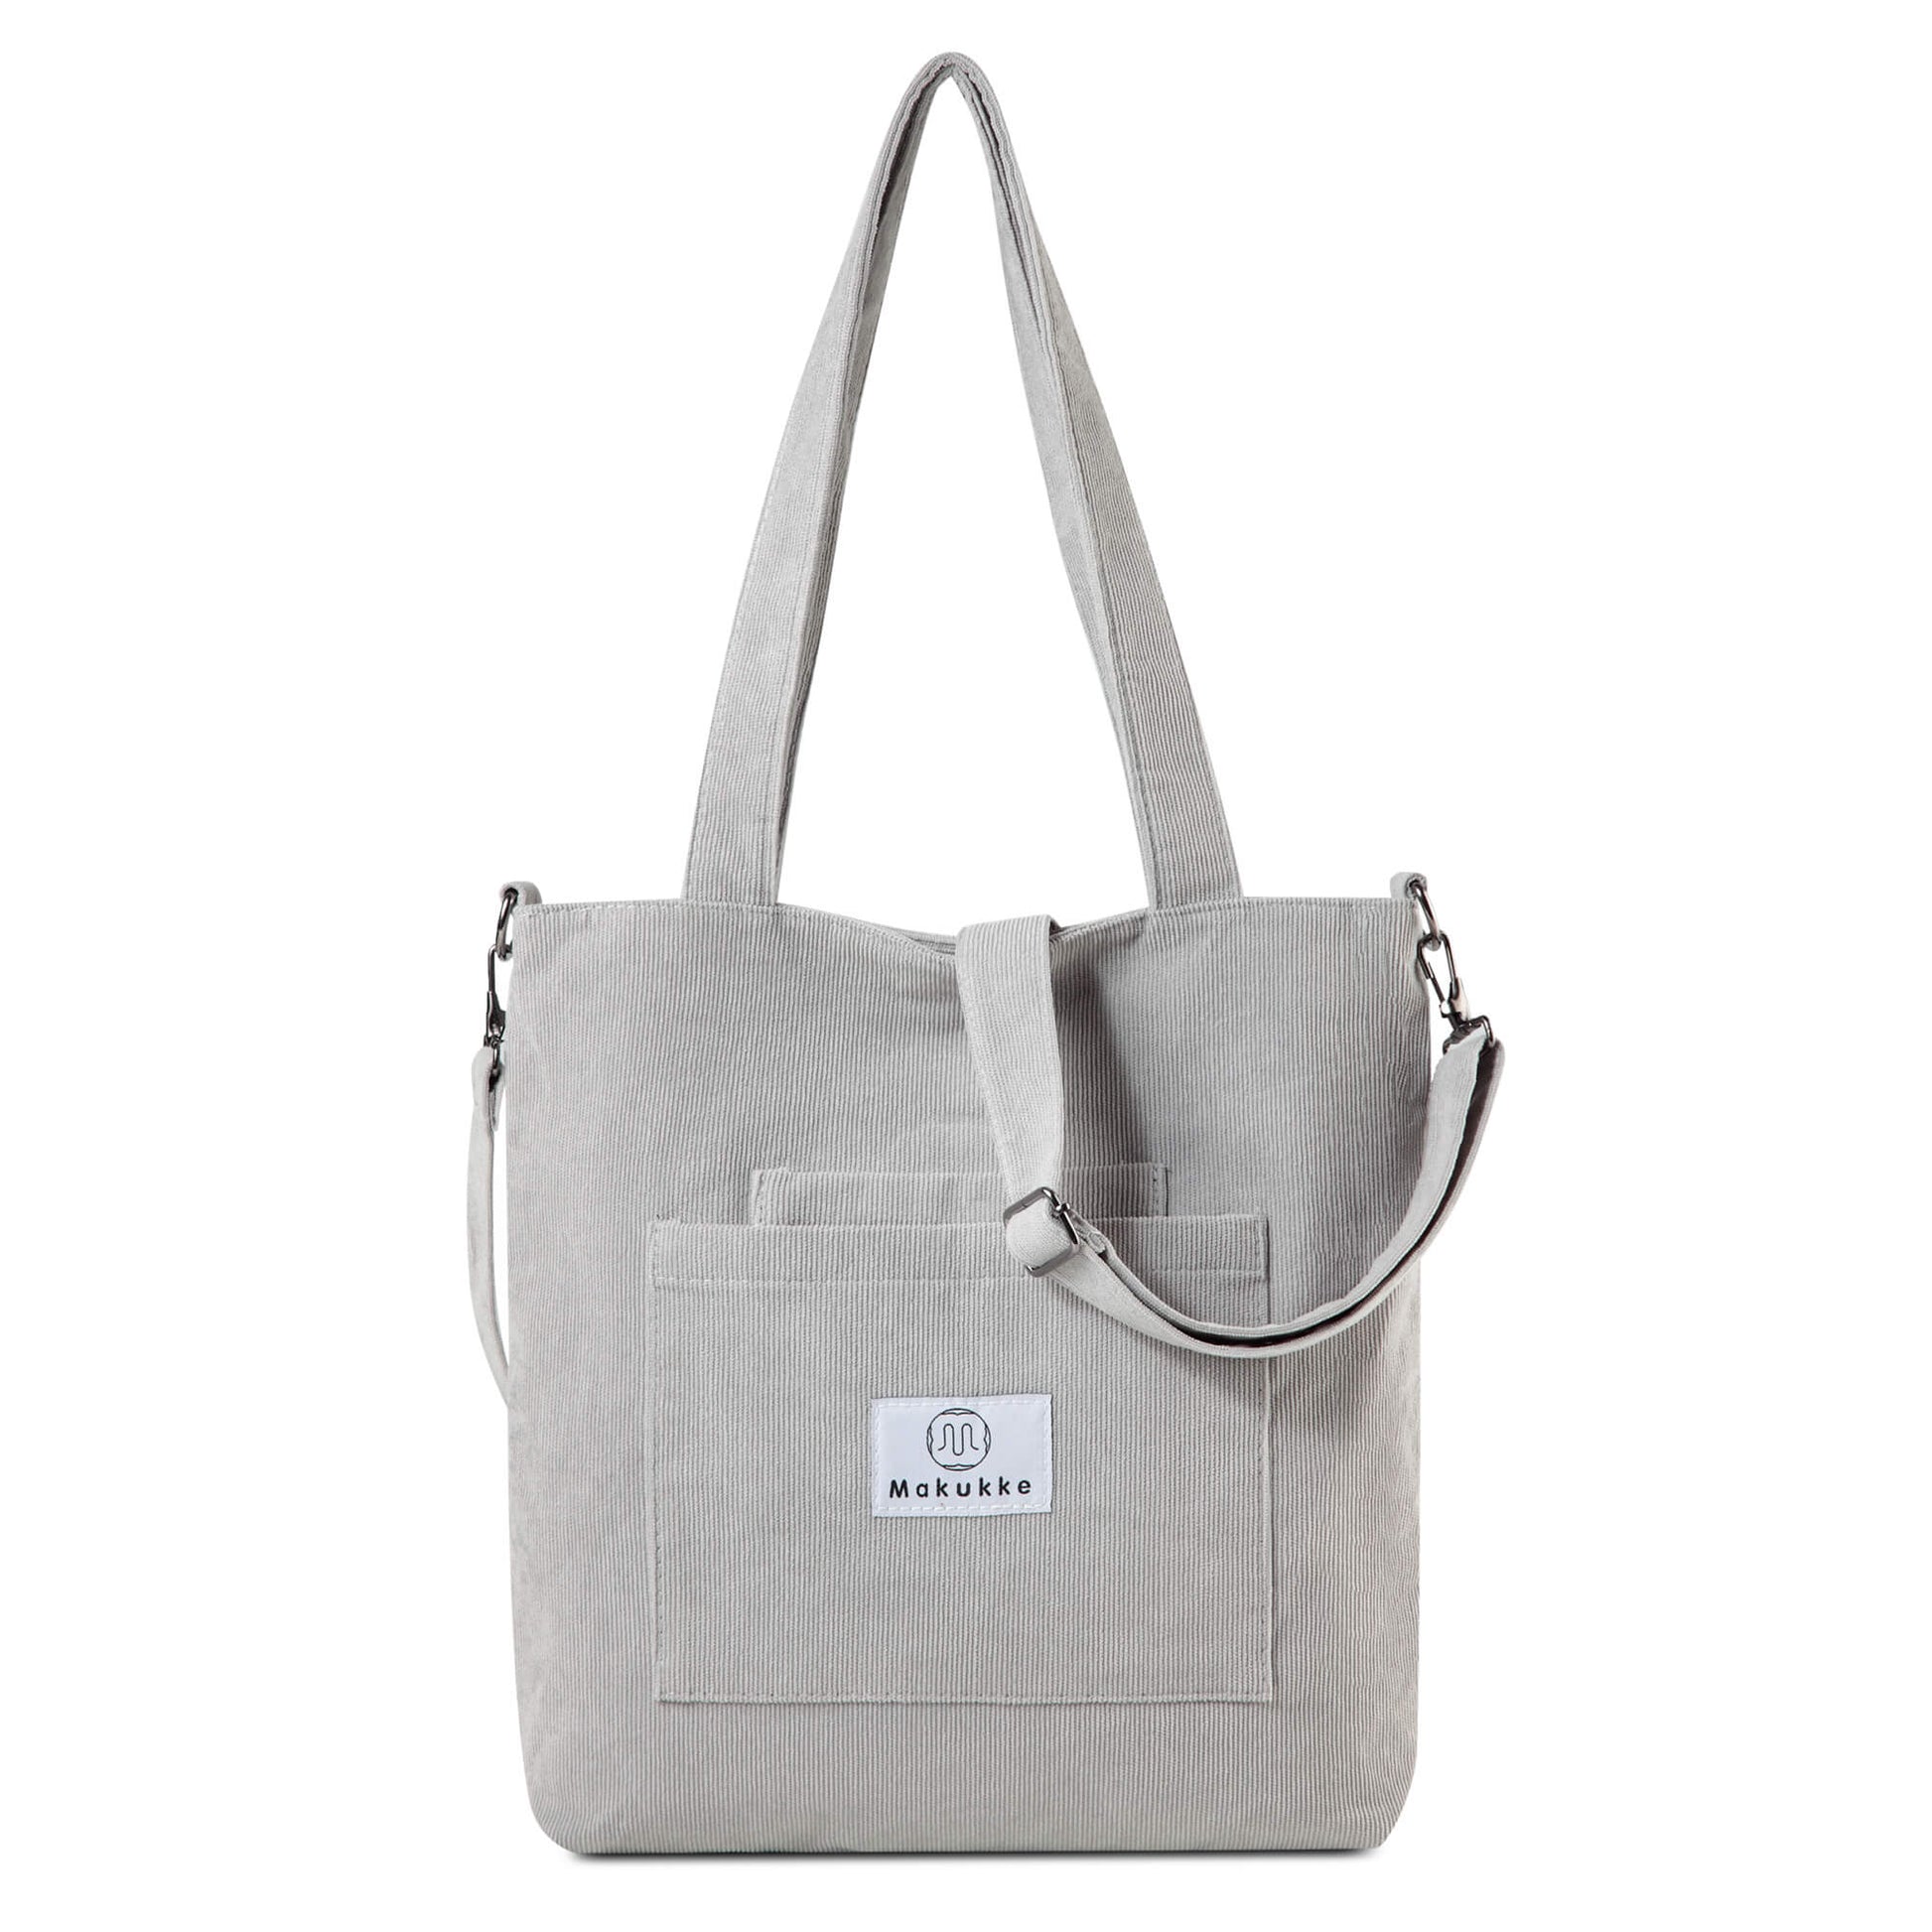 Beige Baguette Bag - Trendy and Eco-Friendly